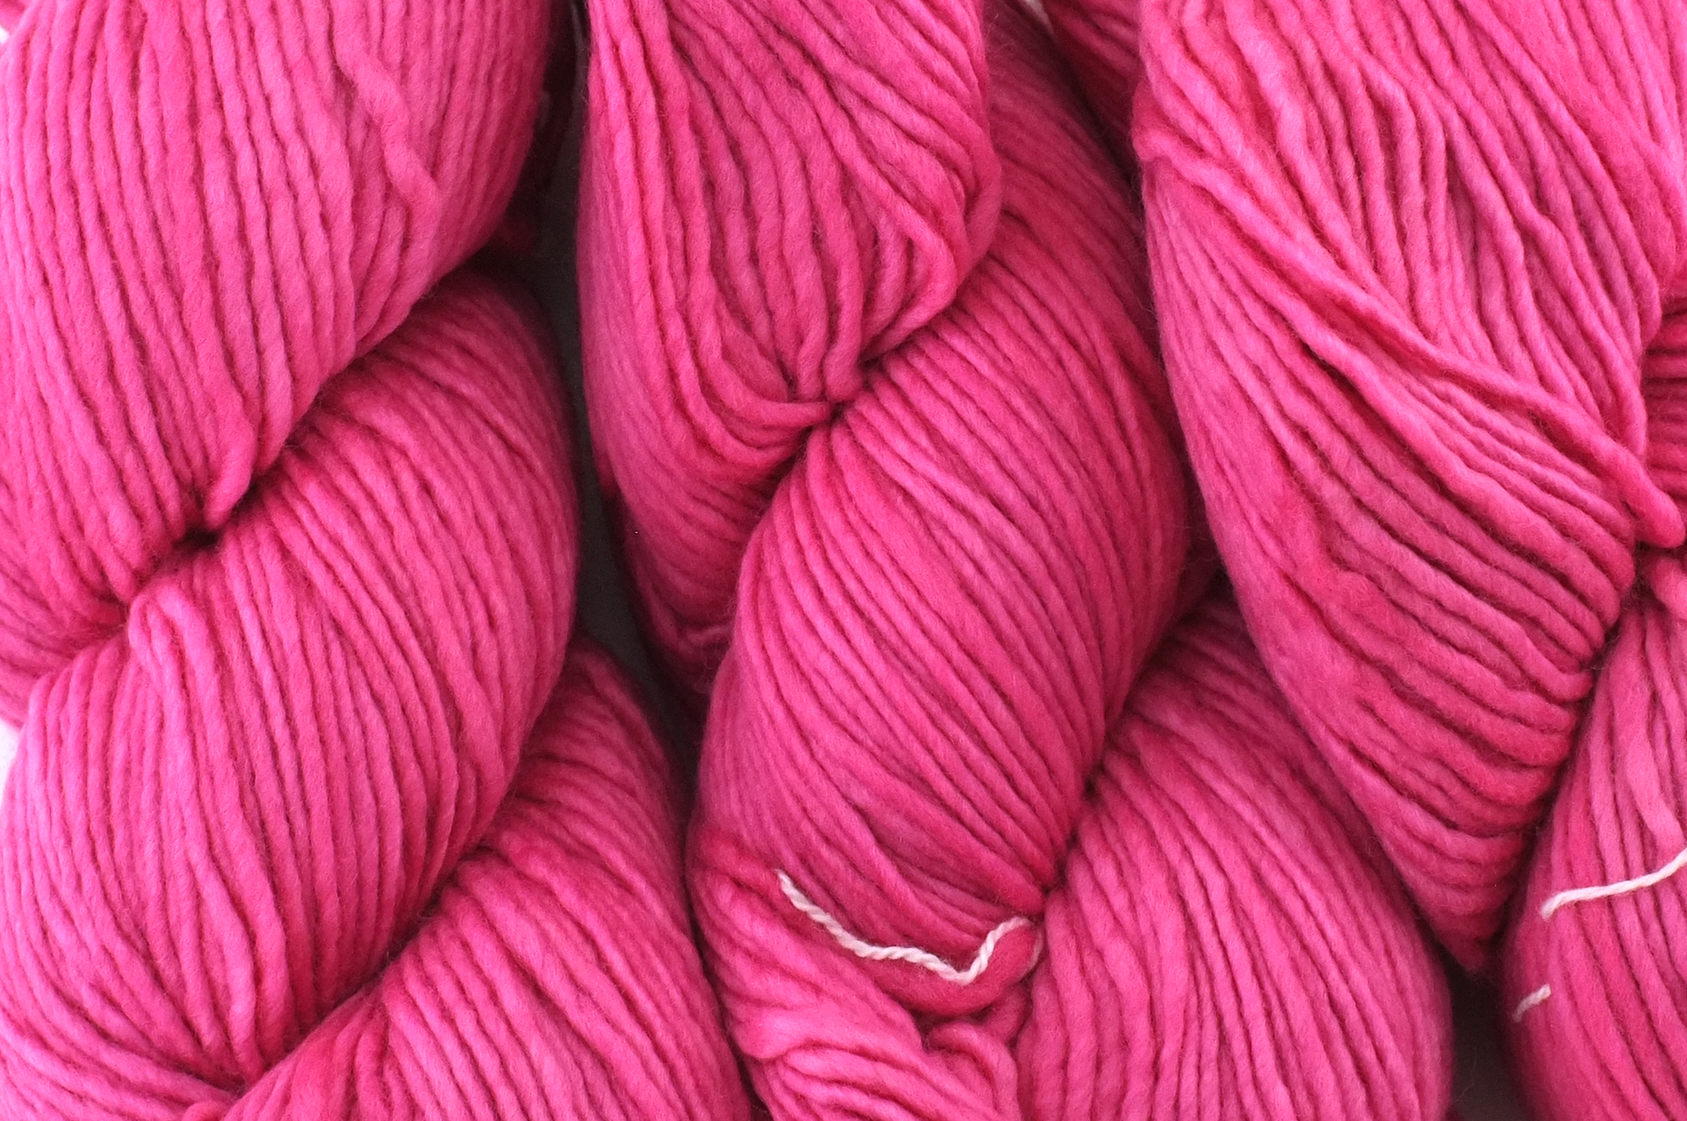 Malabrigo Lace in color Shocking Pink, Lace Weight Merino Wool Knitting Yarn,  pink, #184 Red Beauty Textiles